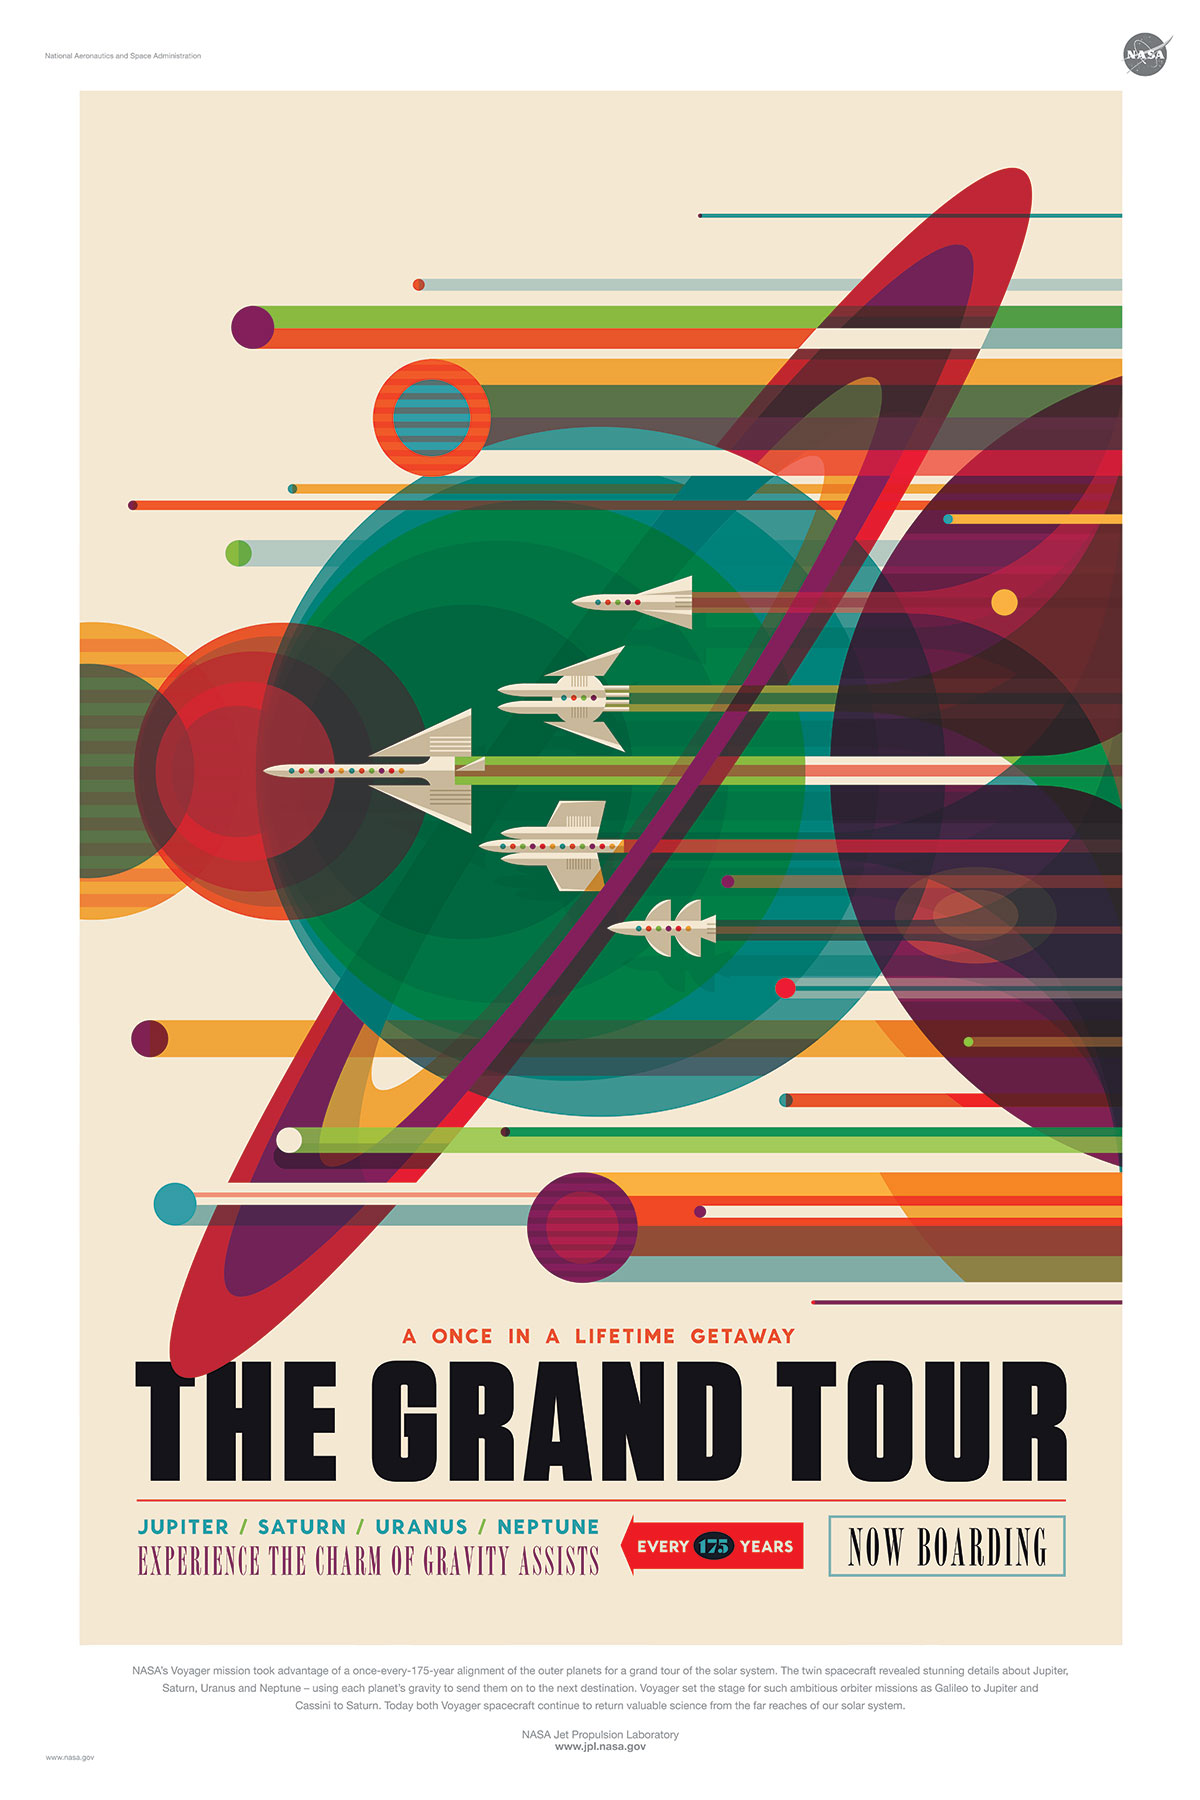 Travel the Universe: 10 New Free NASA Tourism Posters | Gadgets